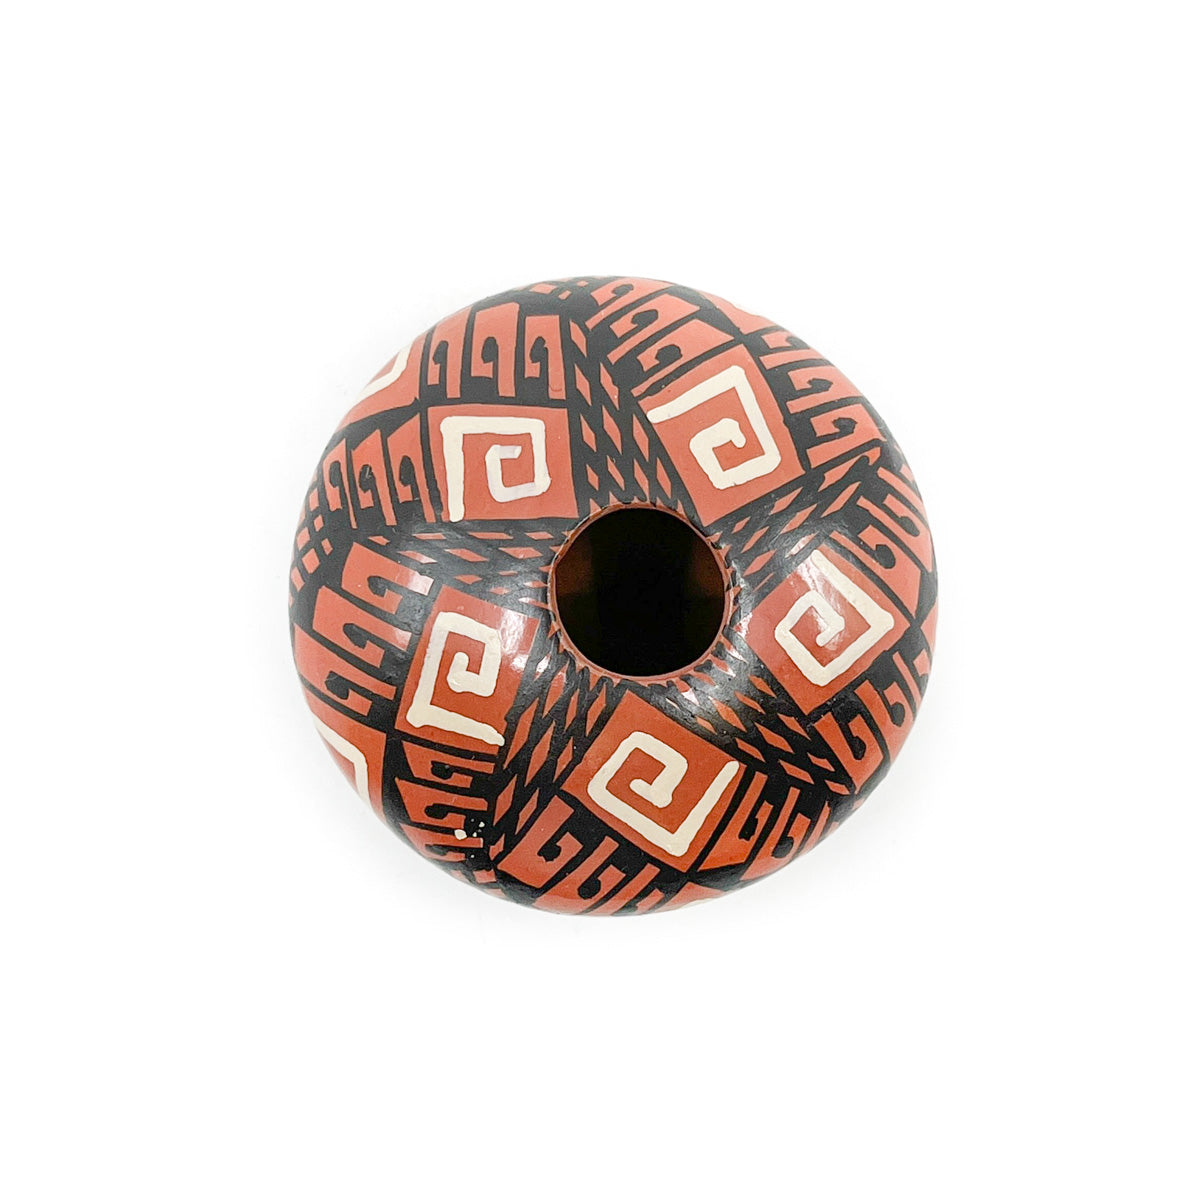 Mini Seed Pot with  White & Black Geometric Designs on Red Clay